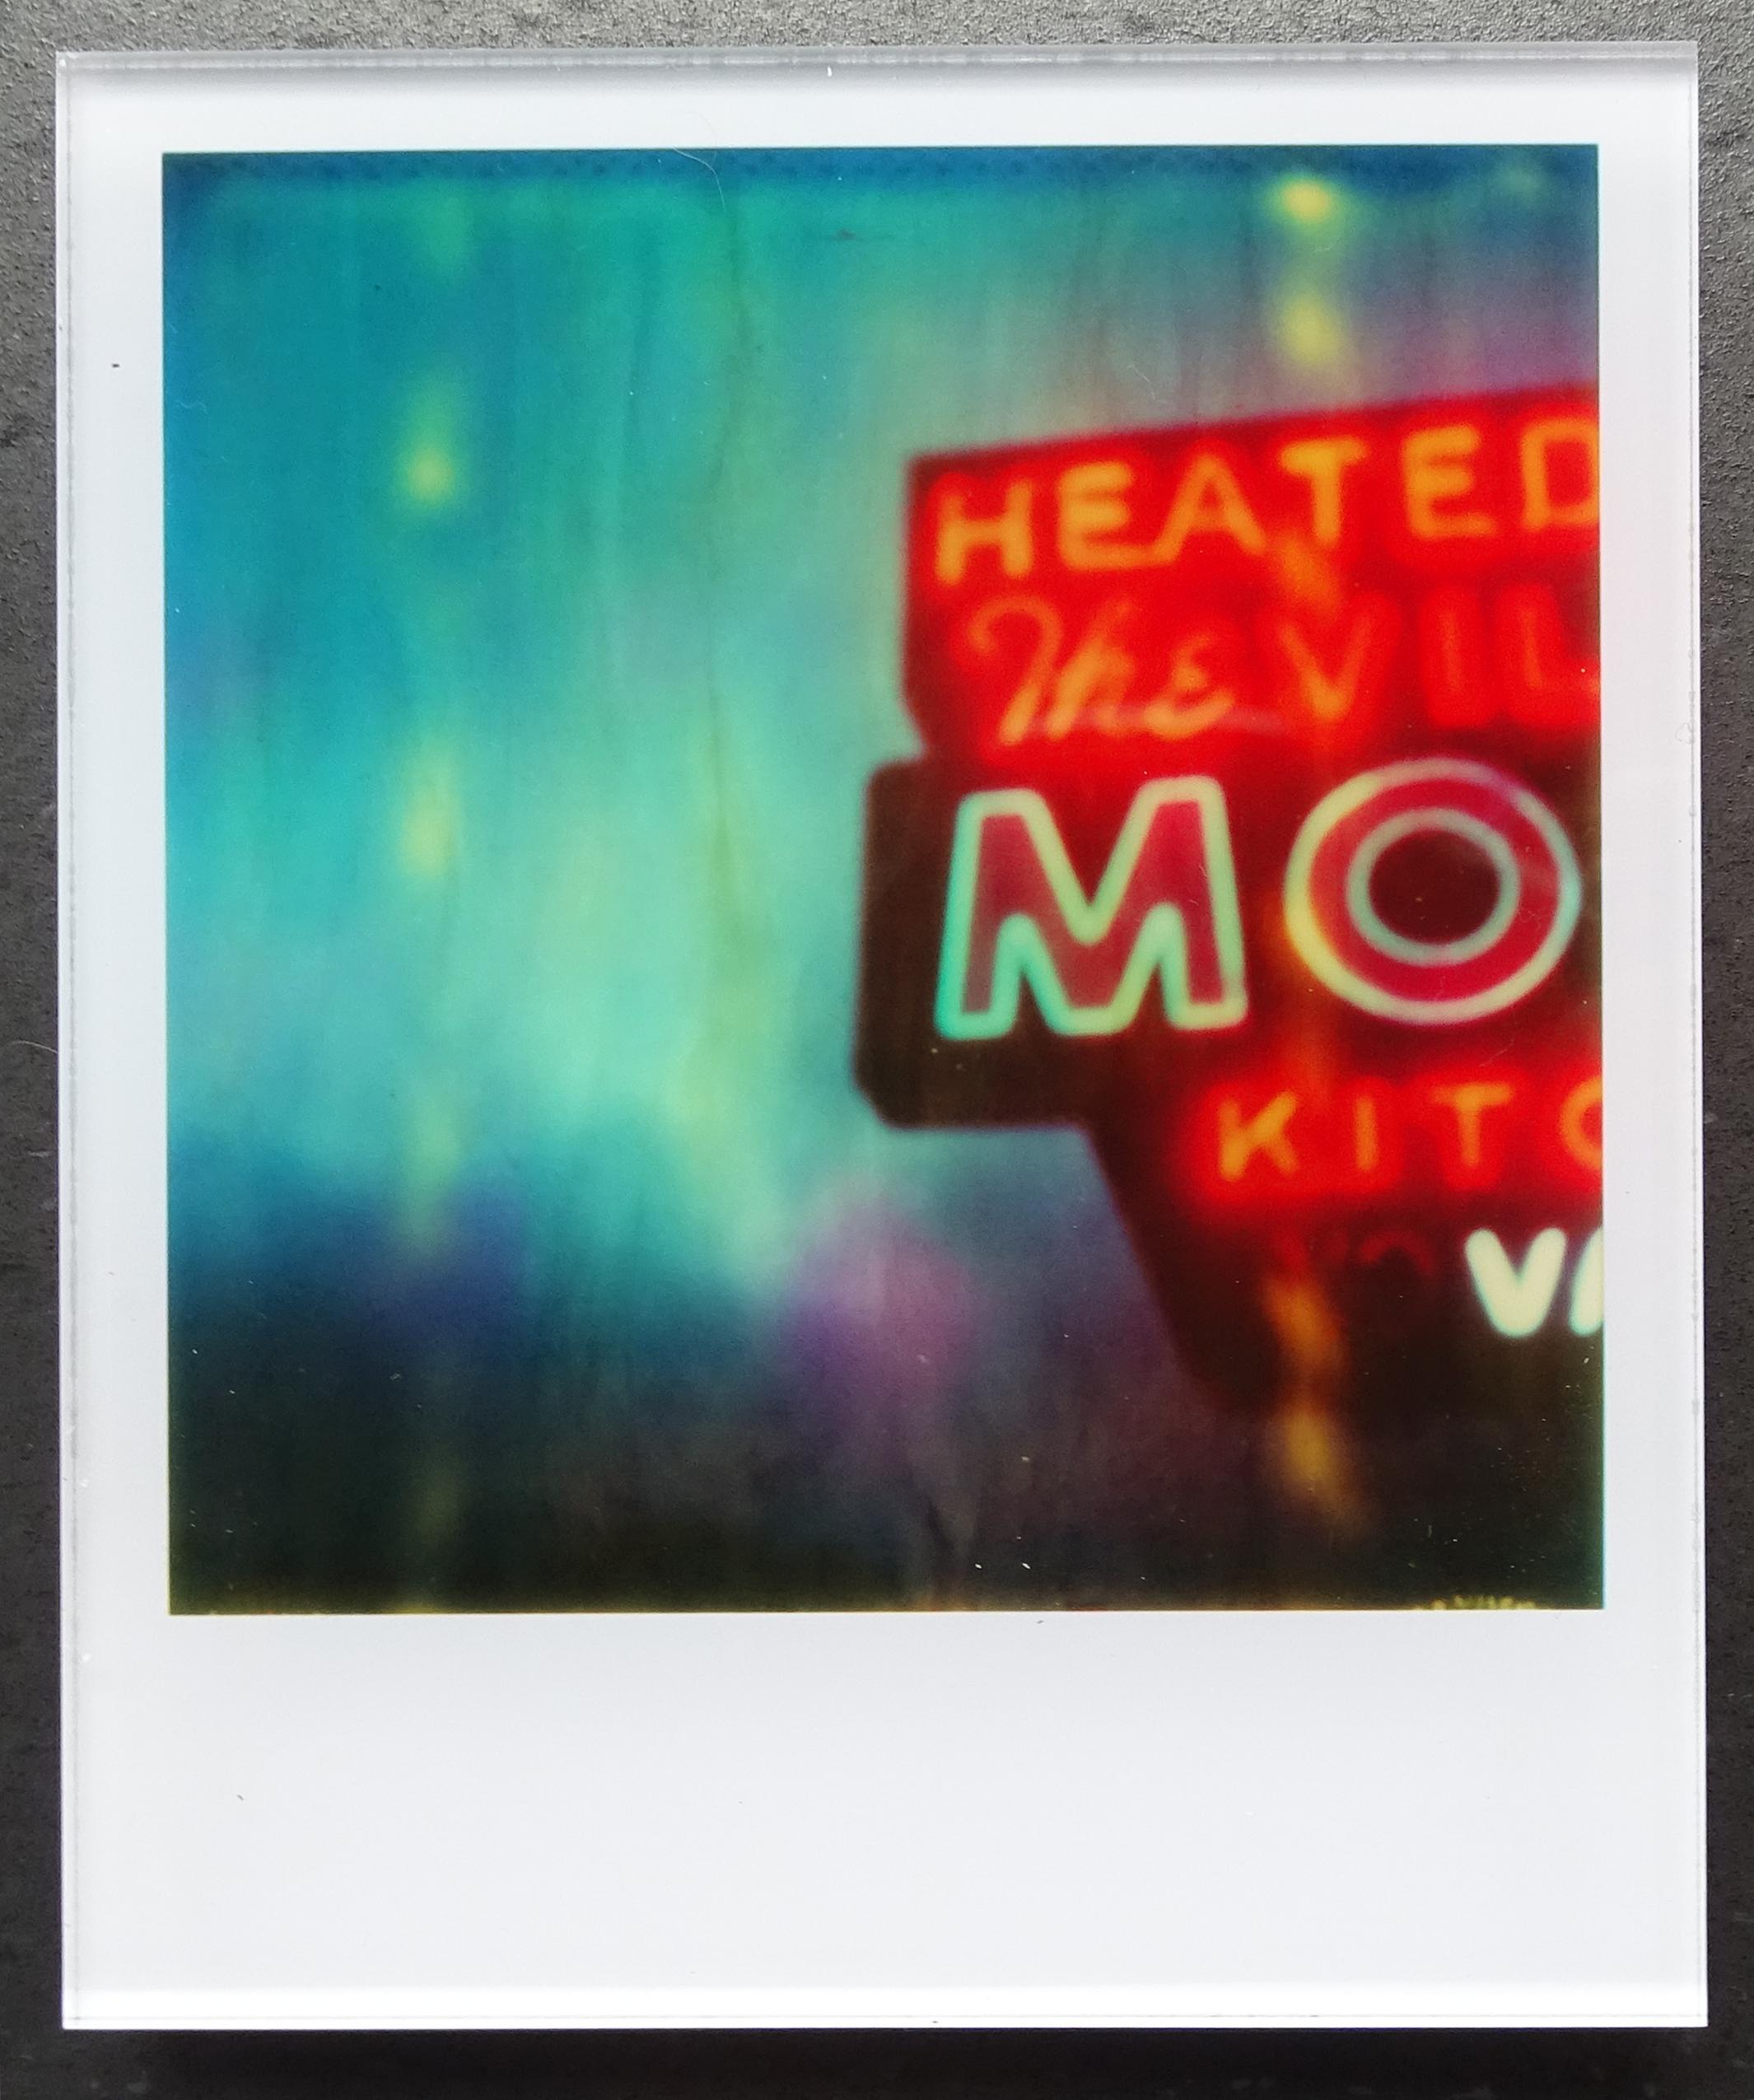 Stefanie Schneider's Minis
Village Motel Blue (The last Picture Show), 2009

Signed and signature brand on verso.
Lambda digital Color Photographs based on a Polaroid.
Sandwiched in between Plexiglass (thickness 0.7cm)

Polaroid sized open Editions